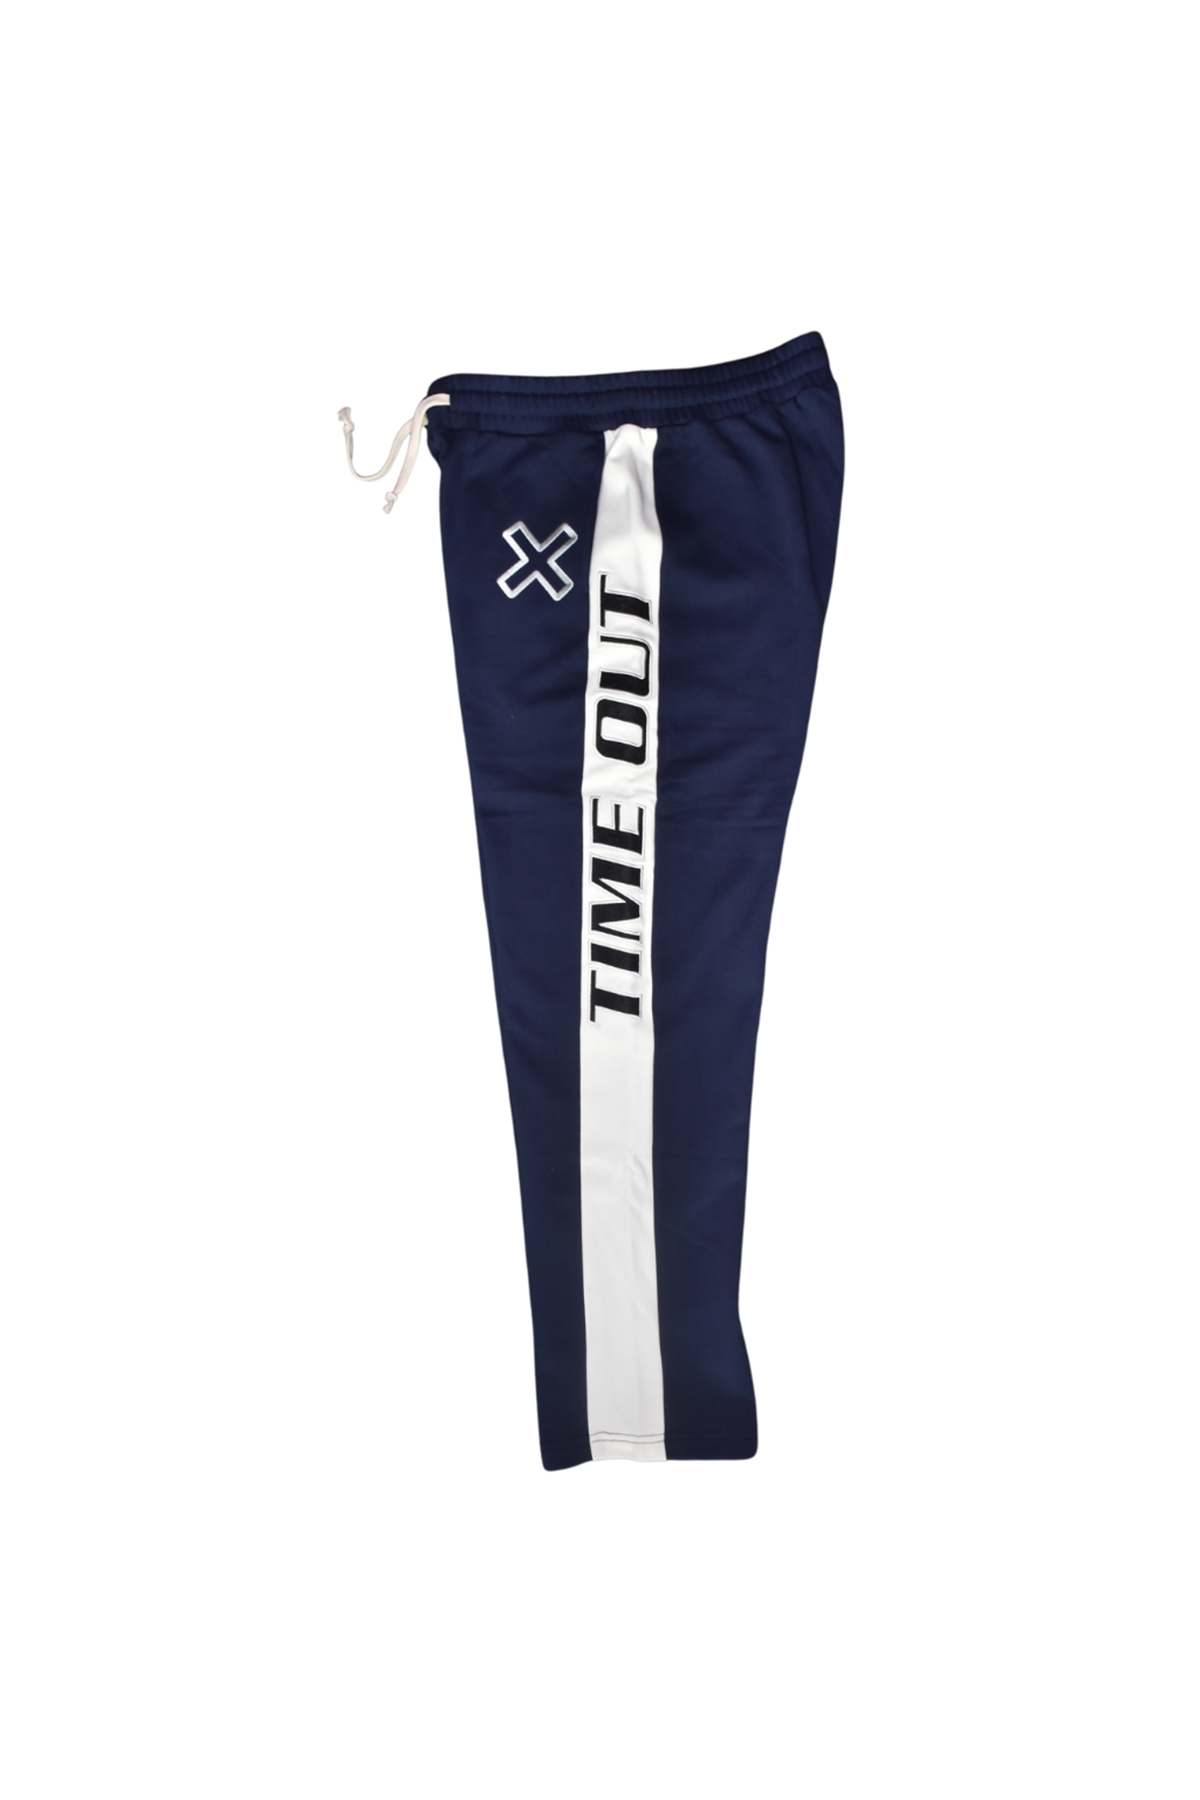 Time-Out-X-Track-Pants—Navy-Blue—Side